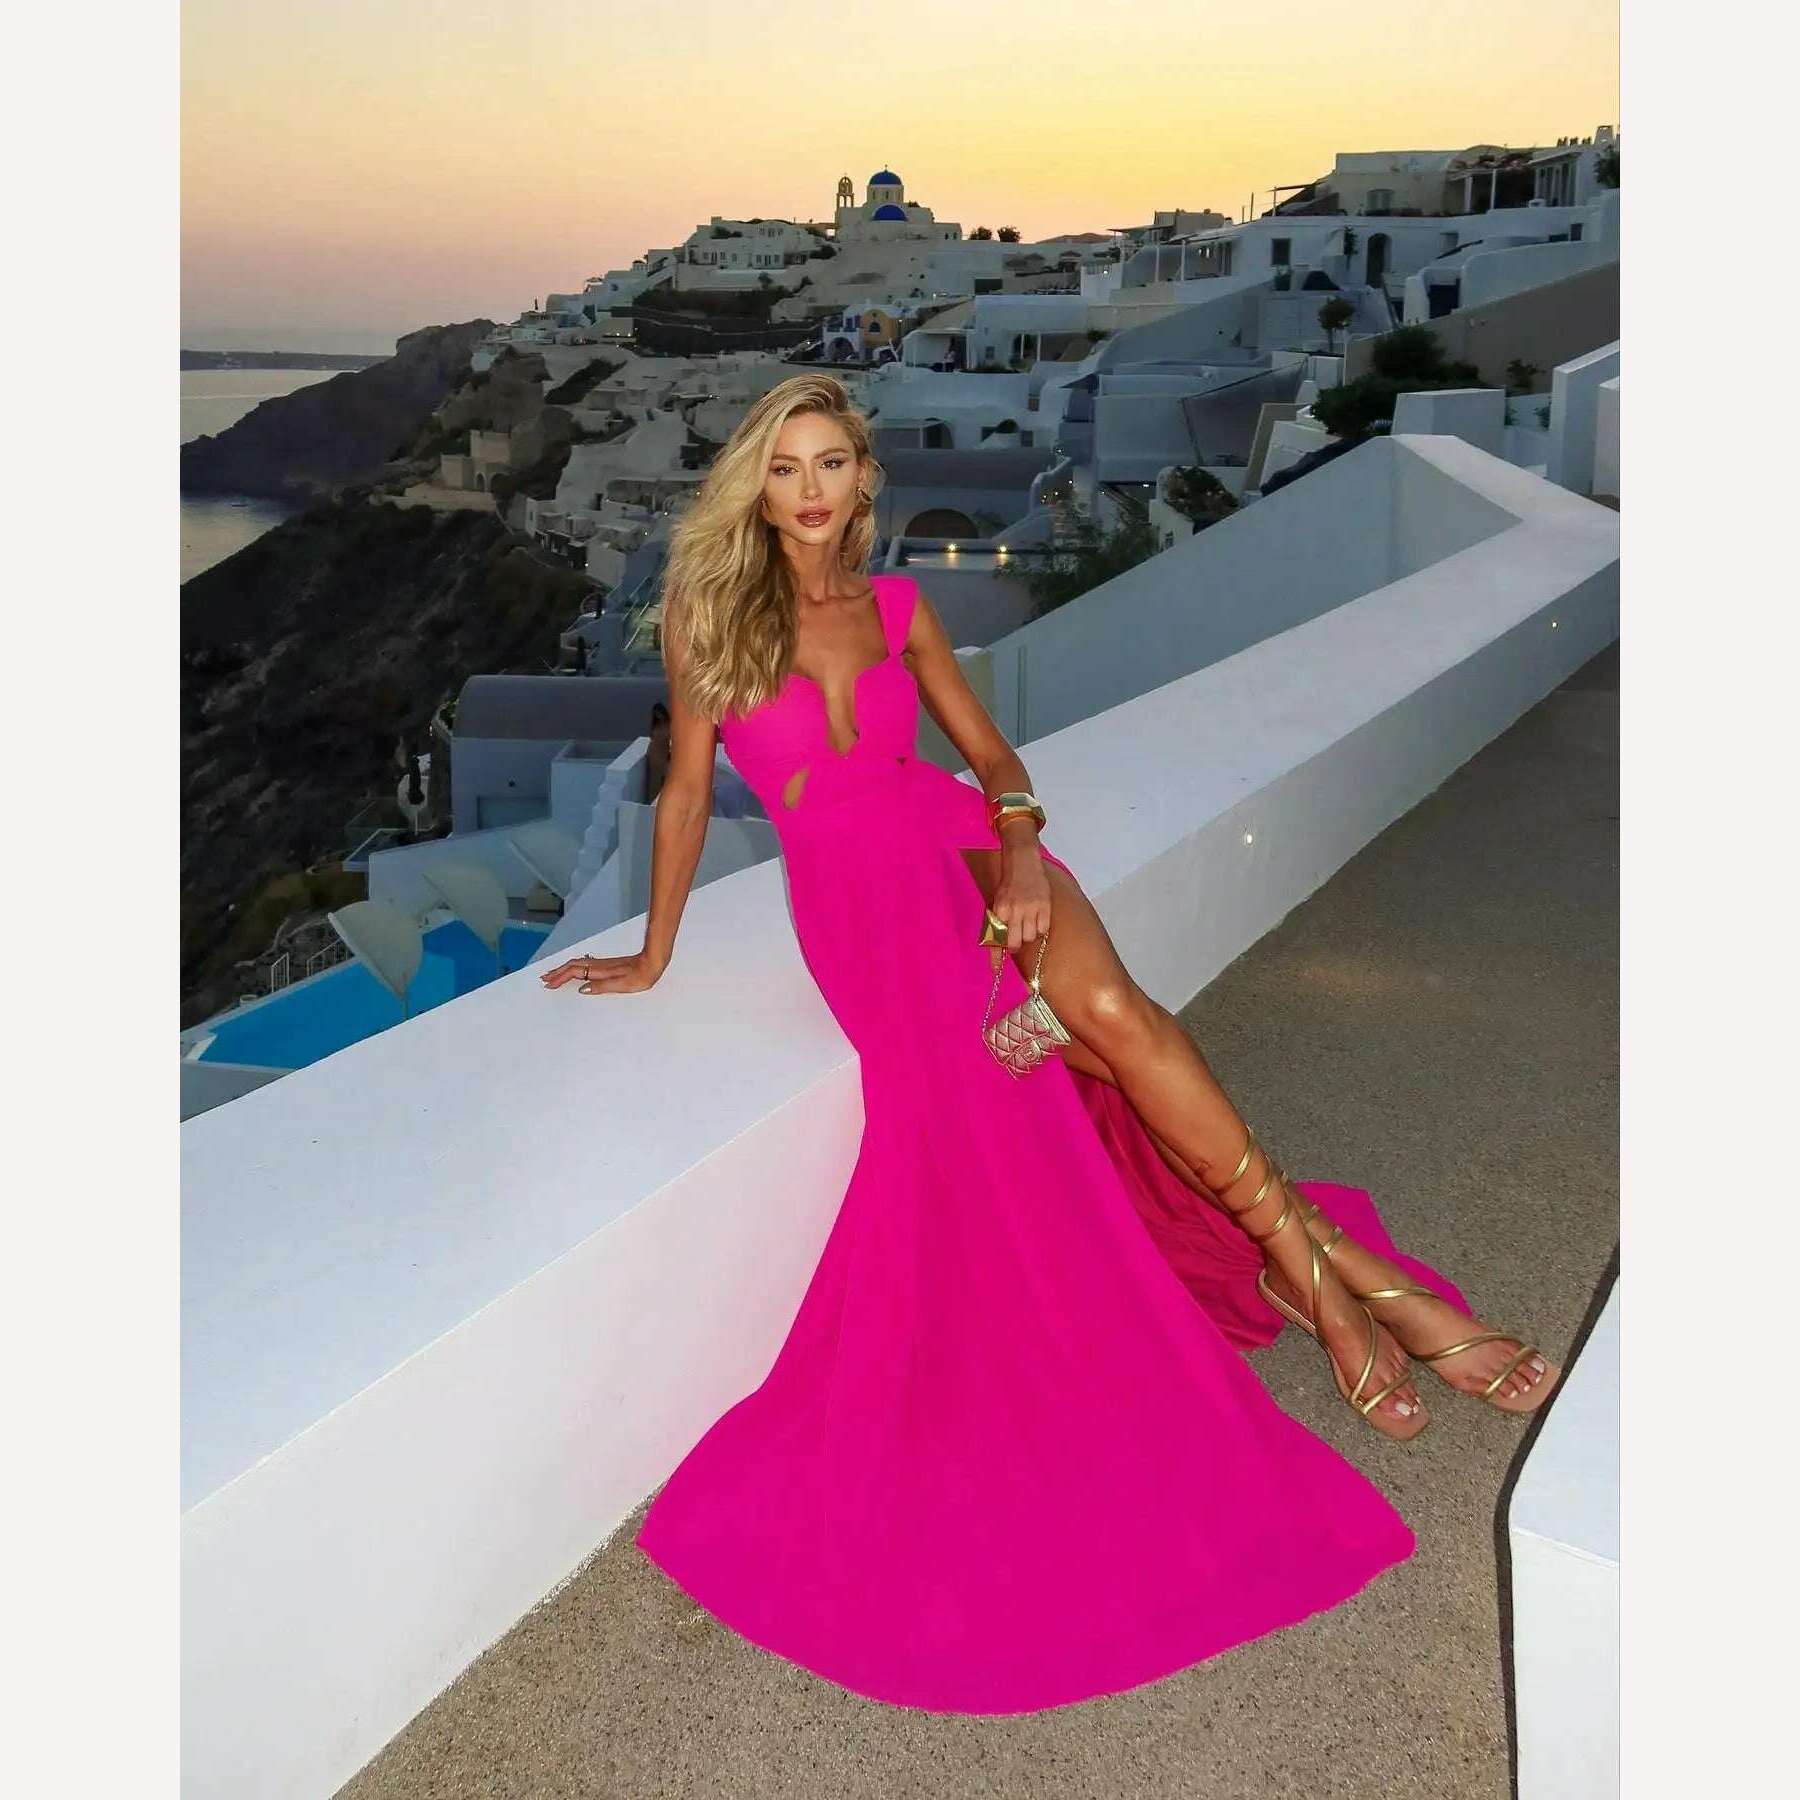 KIMLUD, 2023 Summer New Fashion Women Dresses Elegant Party Female Evening Dress Sexy Women's Clothing Chic Robes, PI23695P1 / S, KIMLUD Women's Clothes